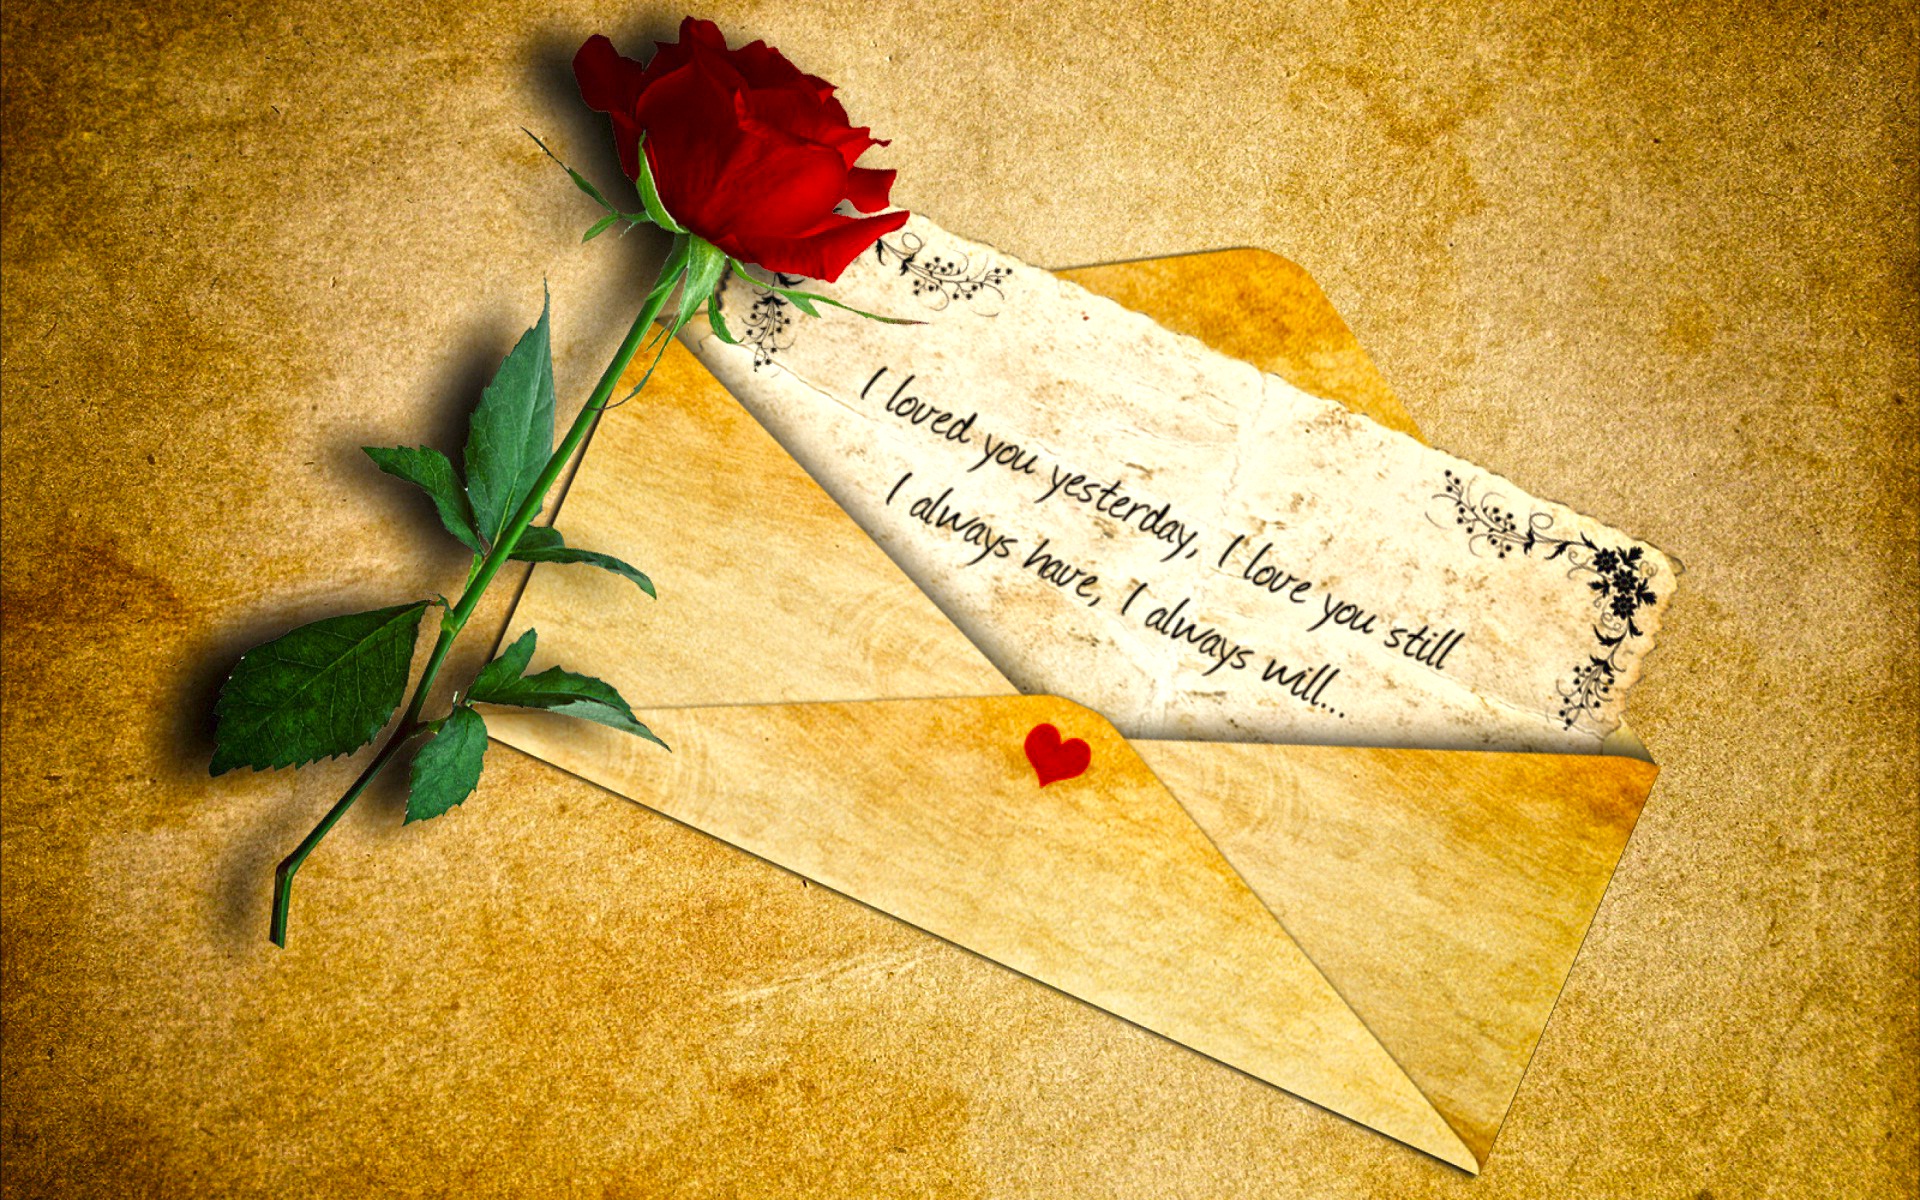 Love letter for my lover HD wallpaper - New hd wallpaperNew hd ...